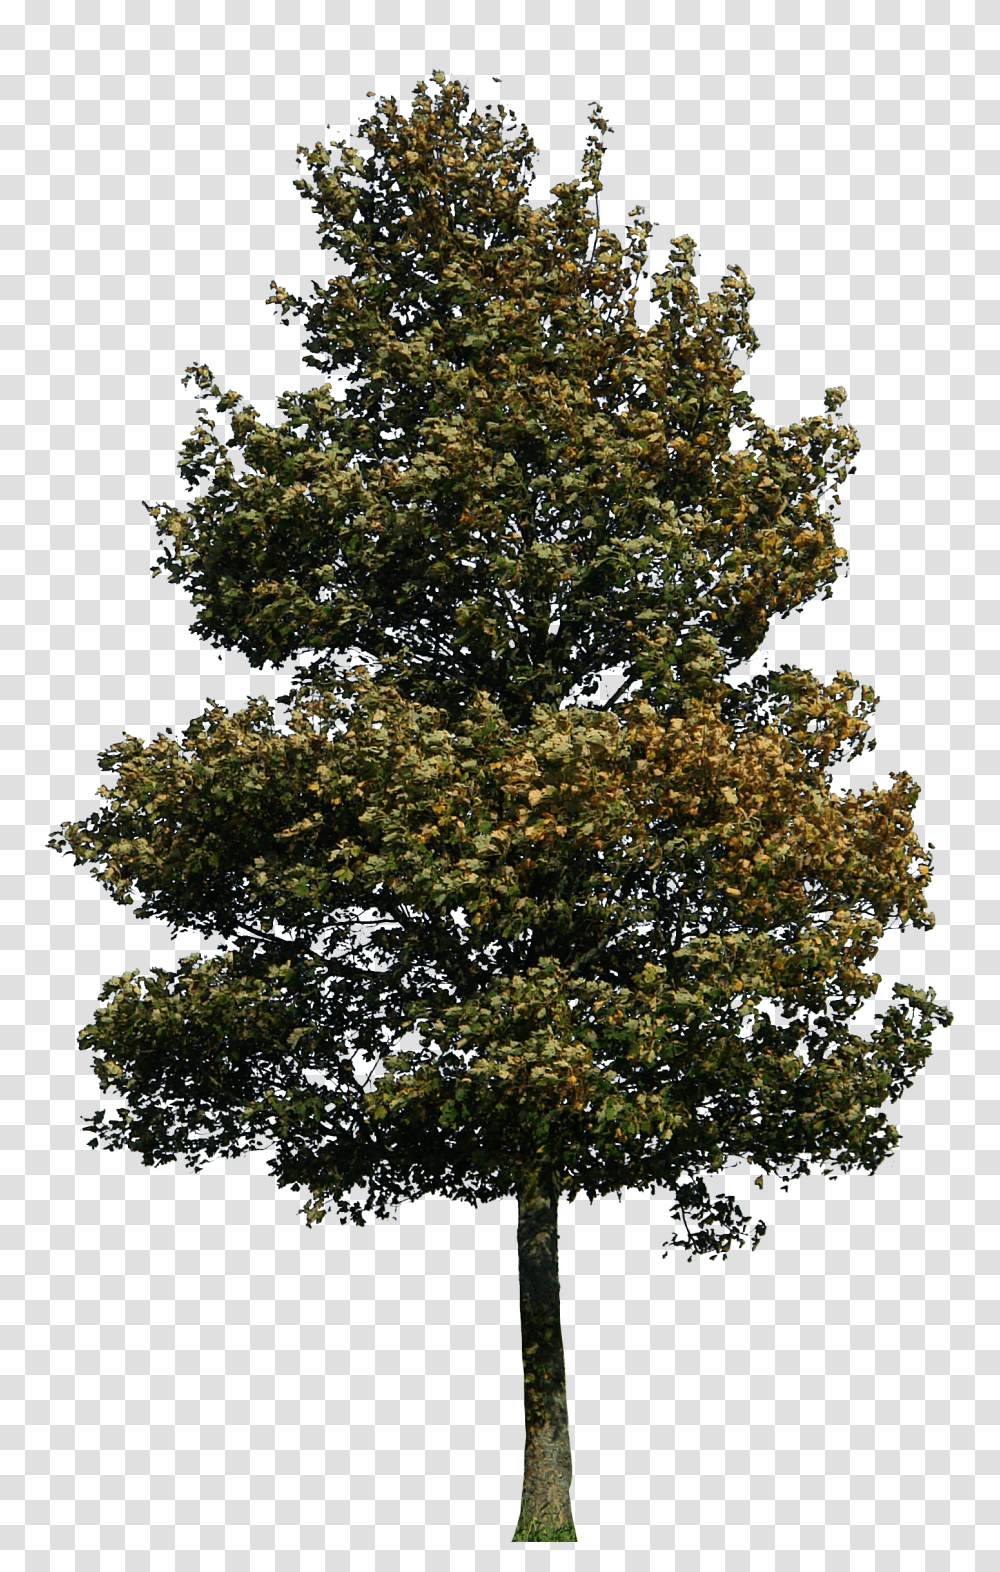 Tree Images Architecture Tree Elevation, Plant, Tree Trunk, Oak, Maple Transparent Png